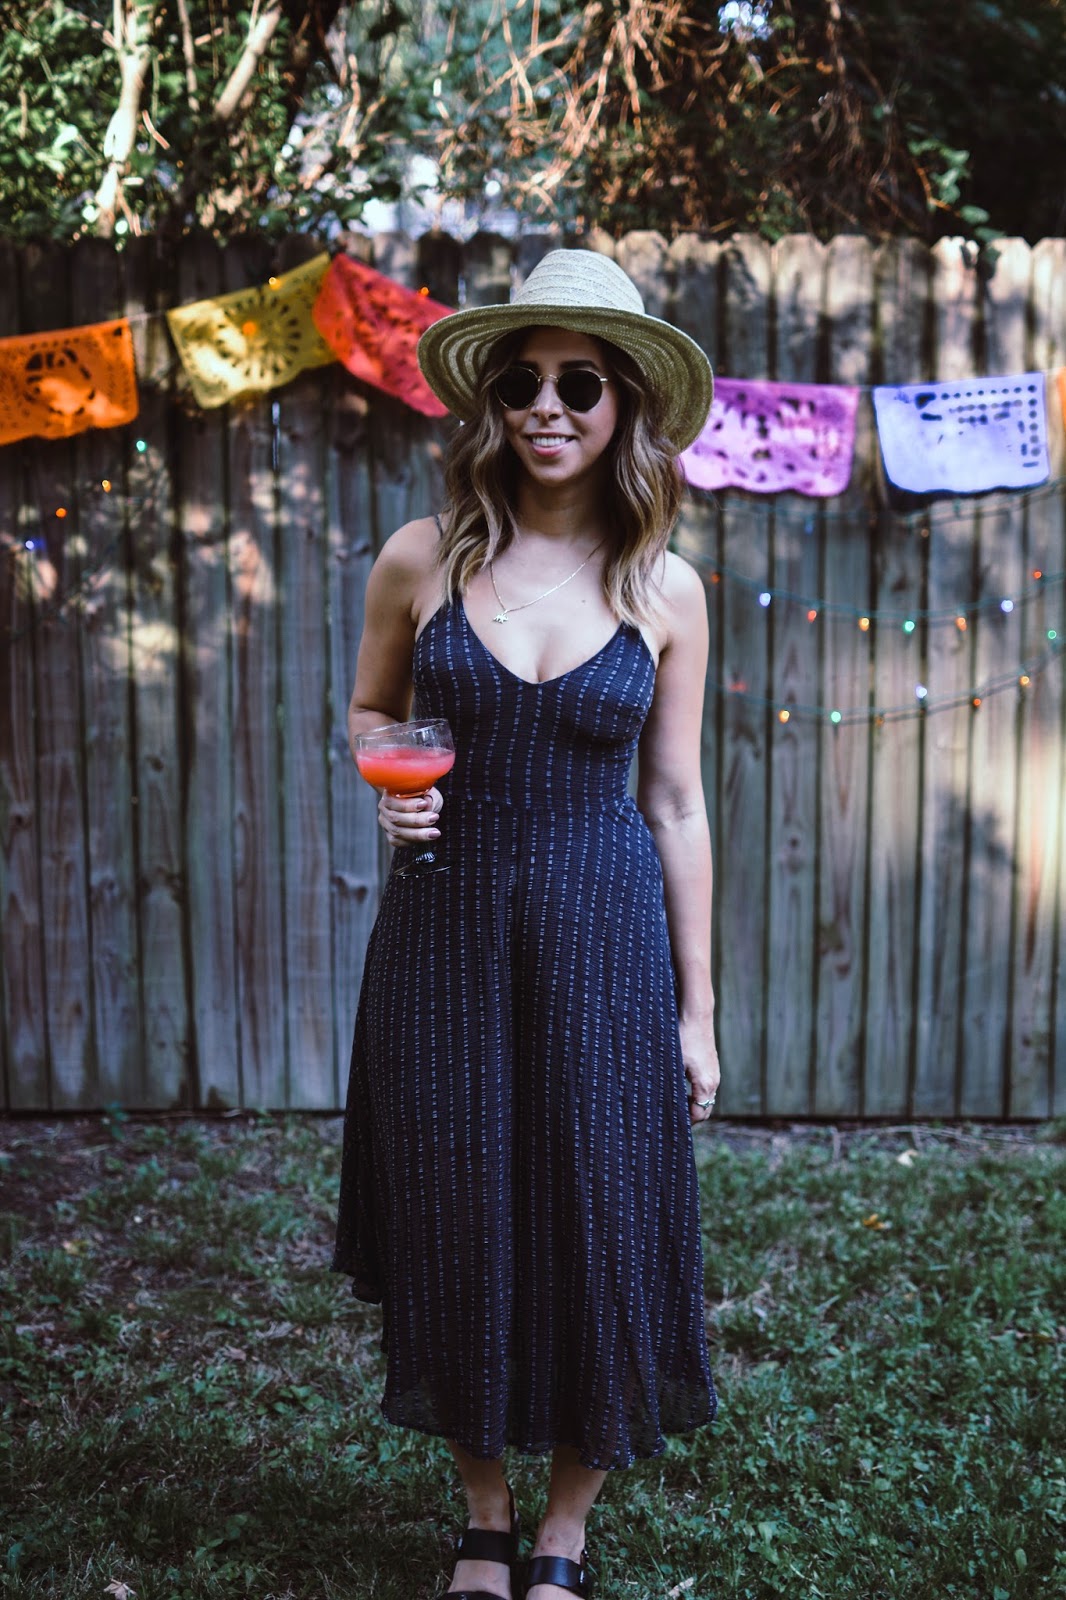 culotte-jumpsuit-summer-style-anthropologie-style-ootd-blogger